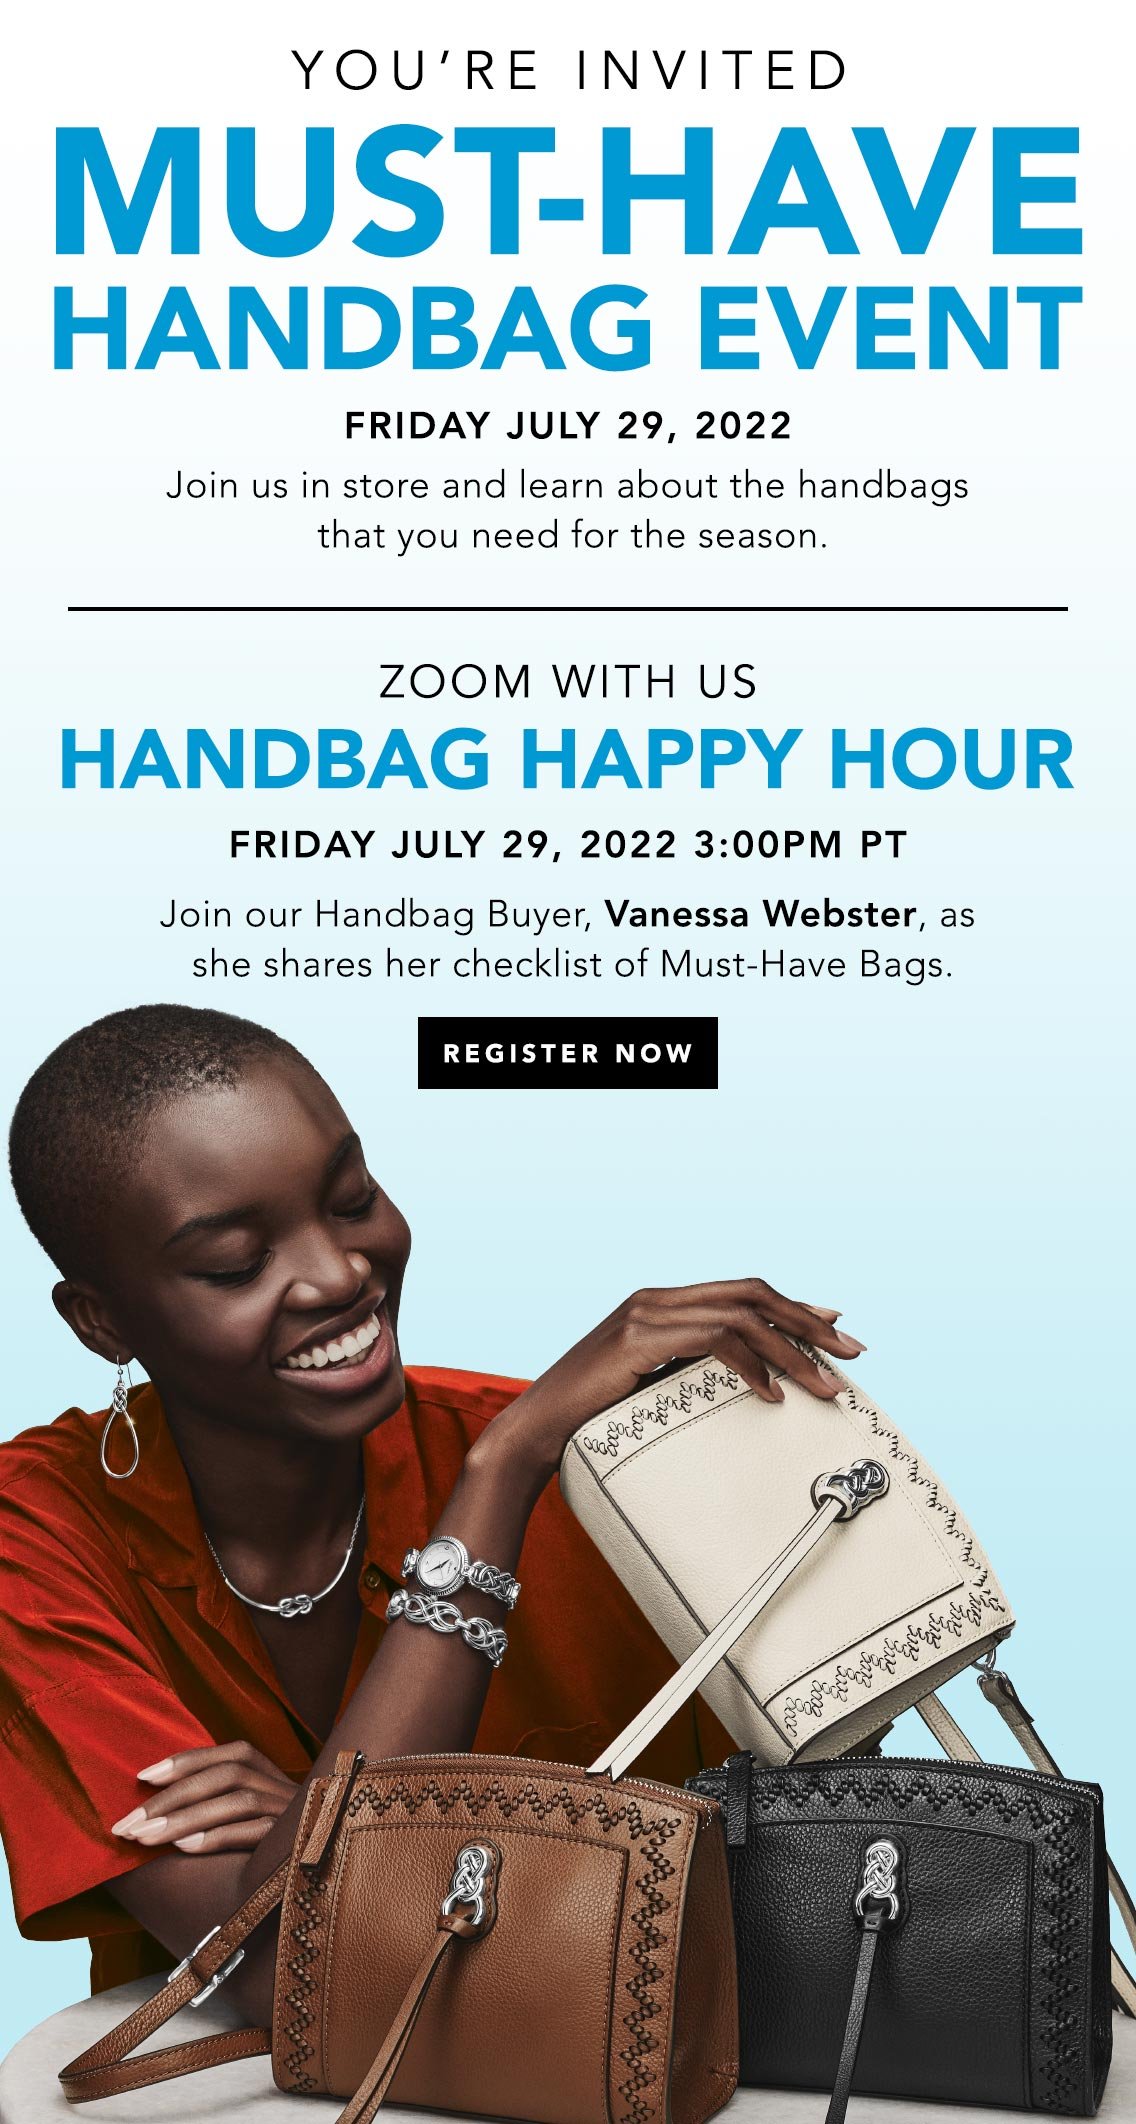 You're Invited - Must-Have Handbag Event - Friday July Twenty-Nine, Two Thousand Twenty-Two - Join us in store and learn about the handbags that you need for the season. - Zoom With Us - Handbag Happy Hour - Friday July Twenty-Nine, Two Thousand Twenty-Two, Three P.M. P.T. - Join our Handbag Buyer, Vanessa Webster, as she shares her checklist of Must-Have Bags. - Register Now